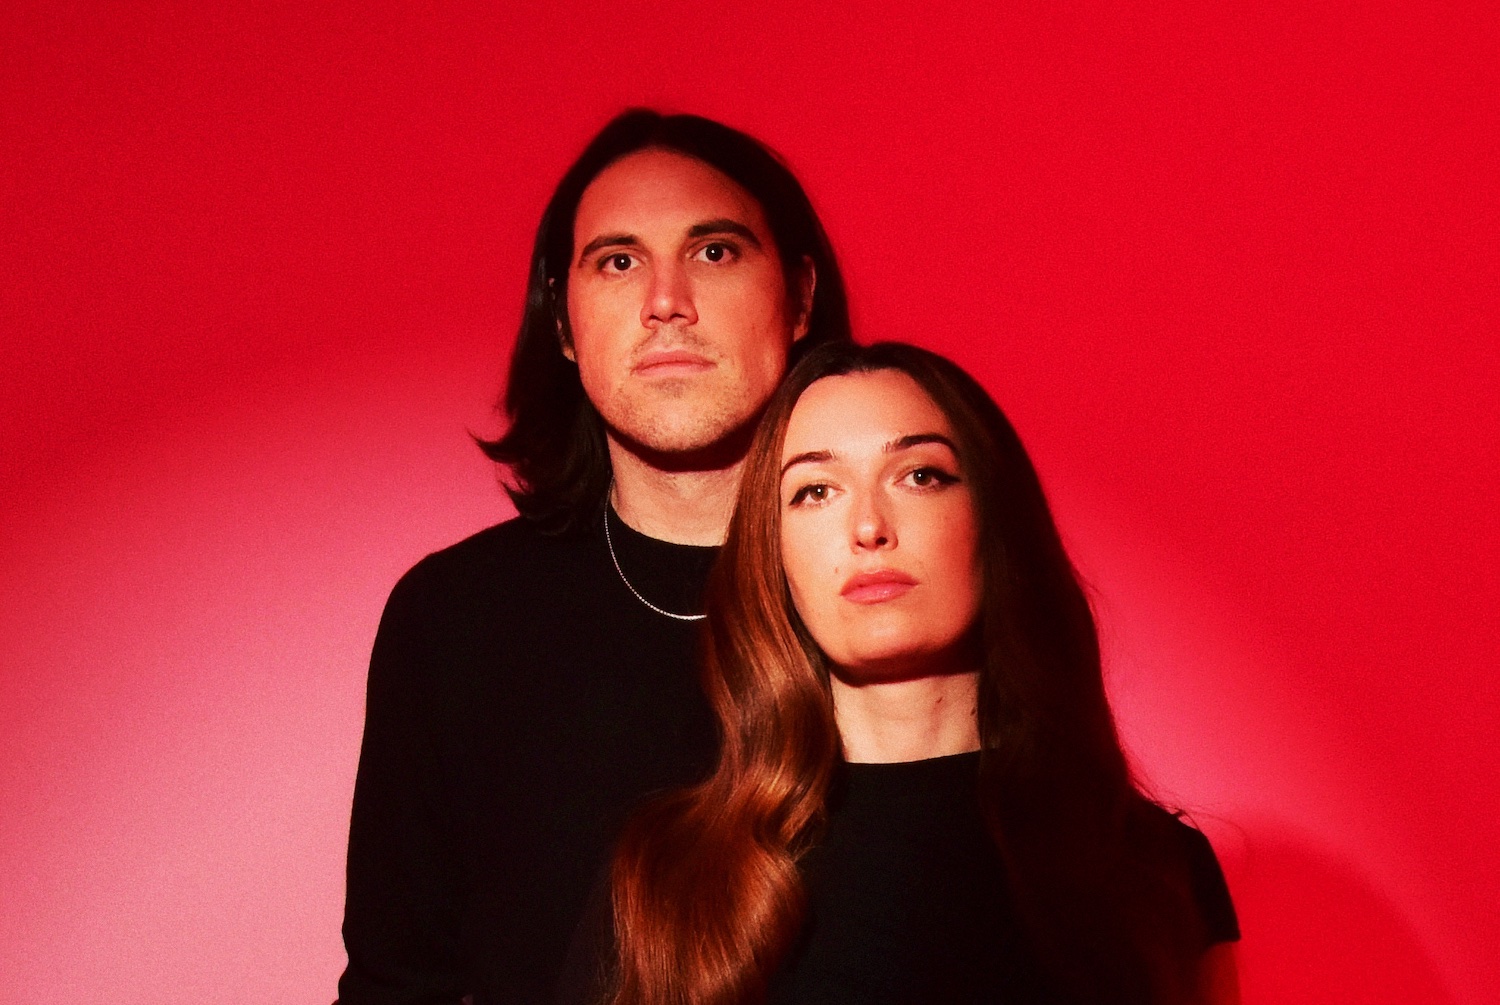 Cults return to simplicity with “Crybaby” from new LP “To the Ghosts”